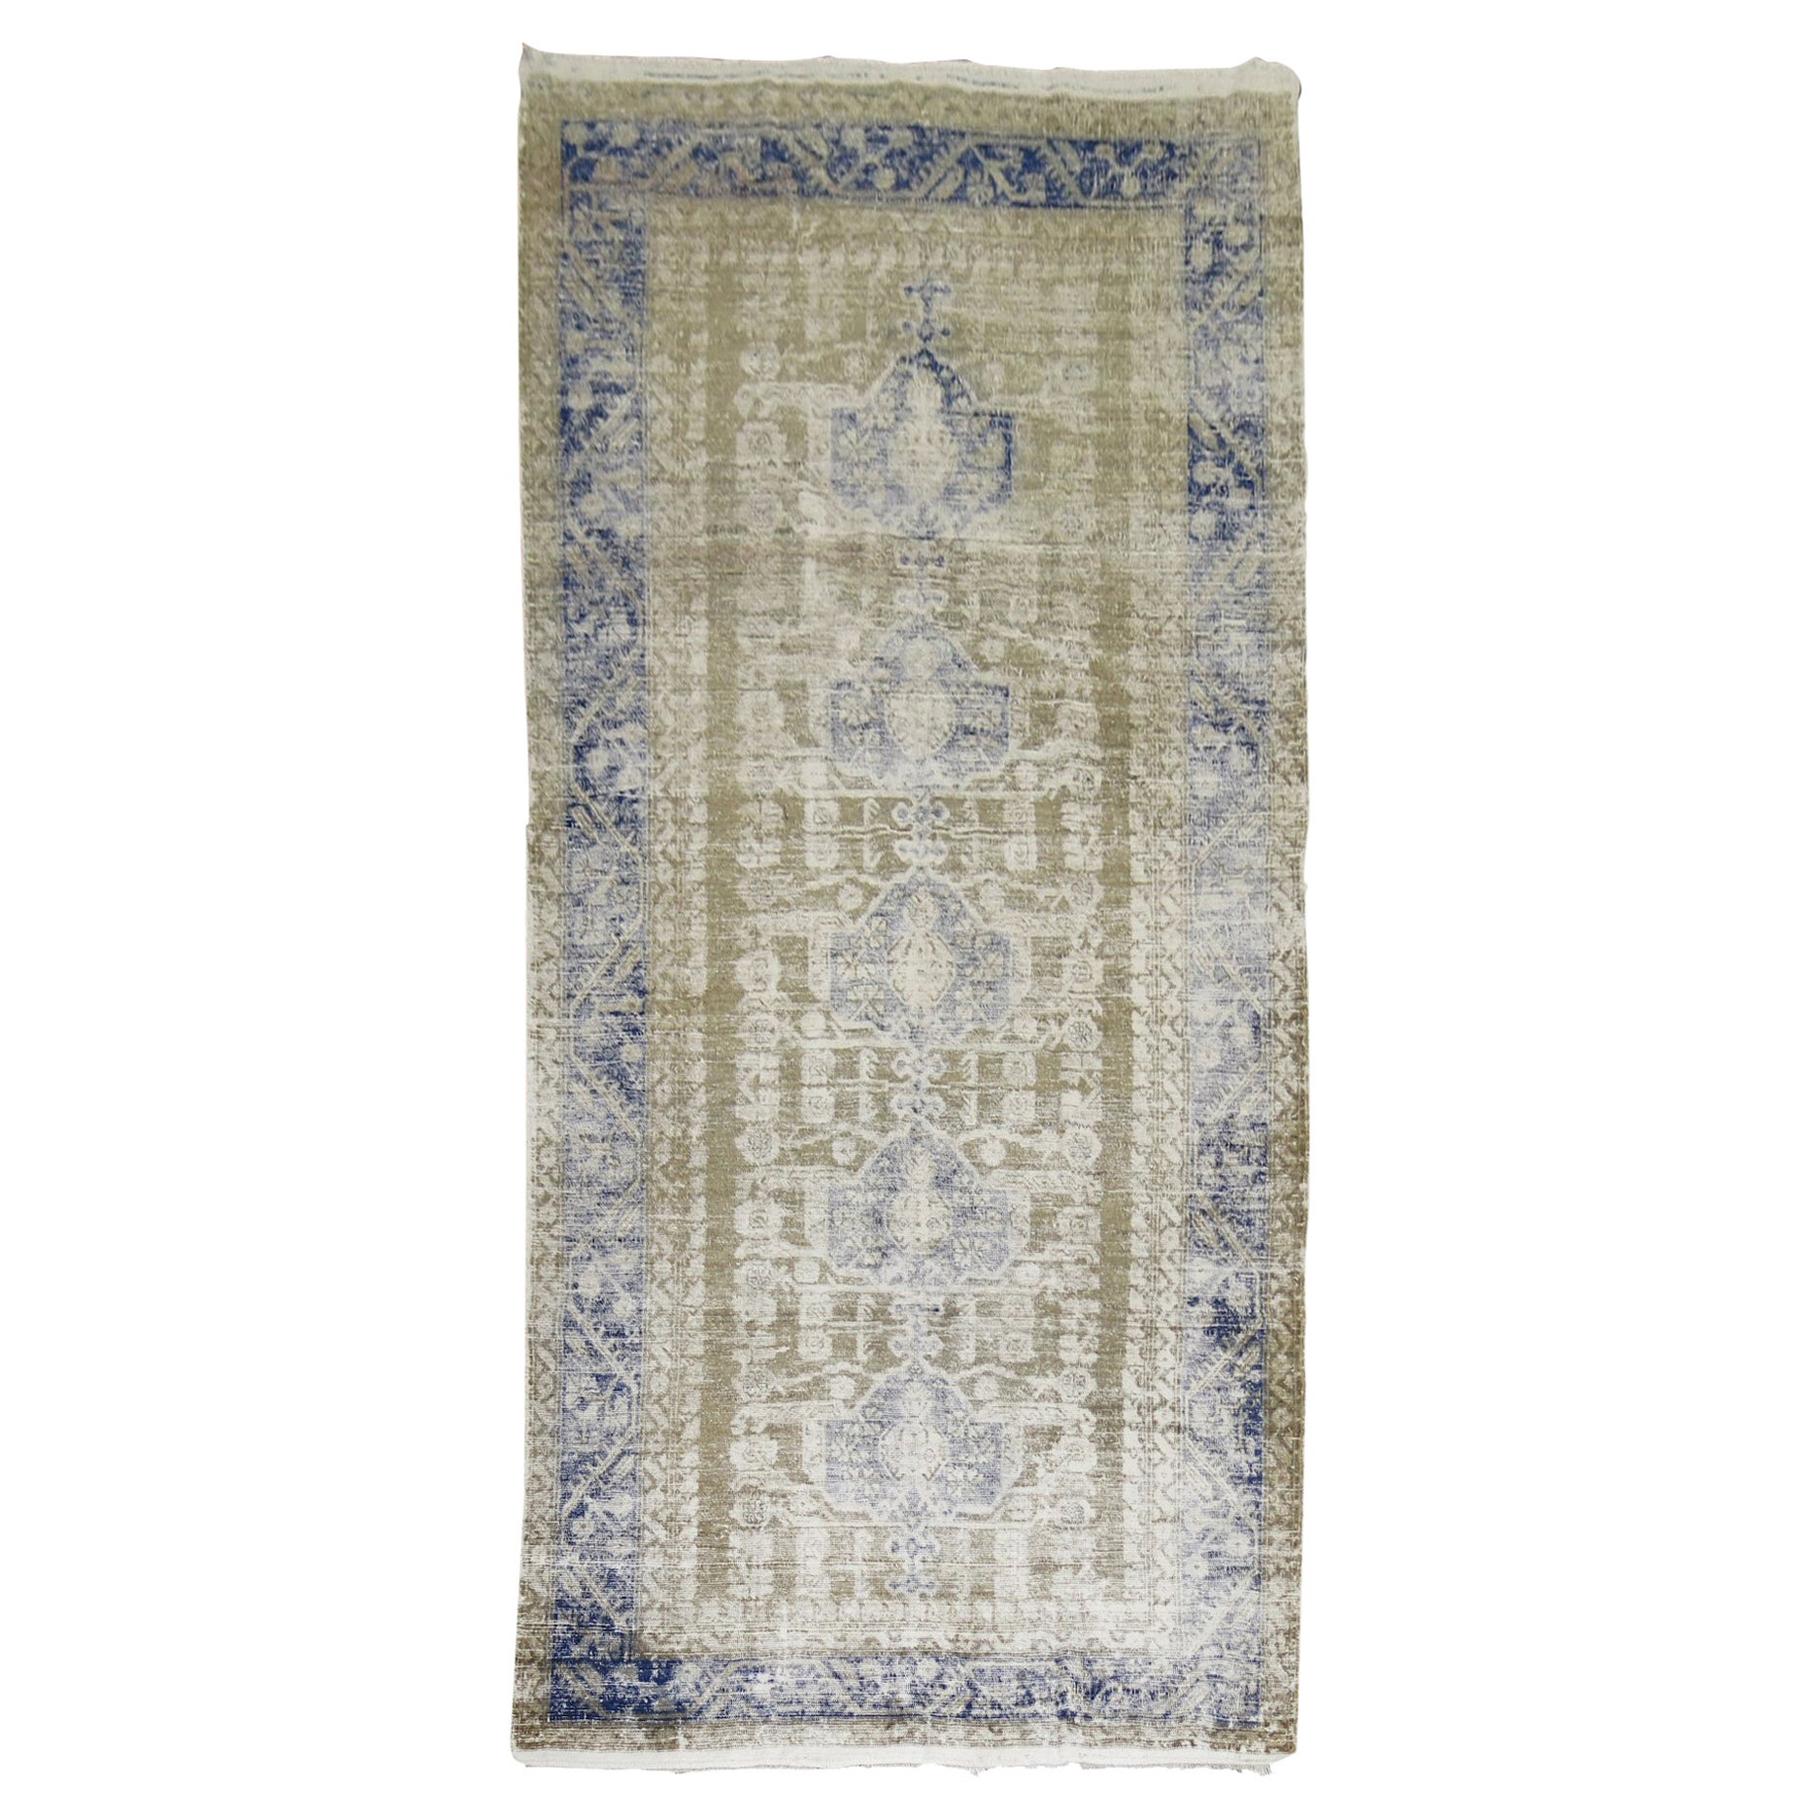 Shabby Chic Turkish Gallery Rug For Sale